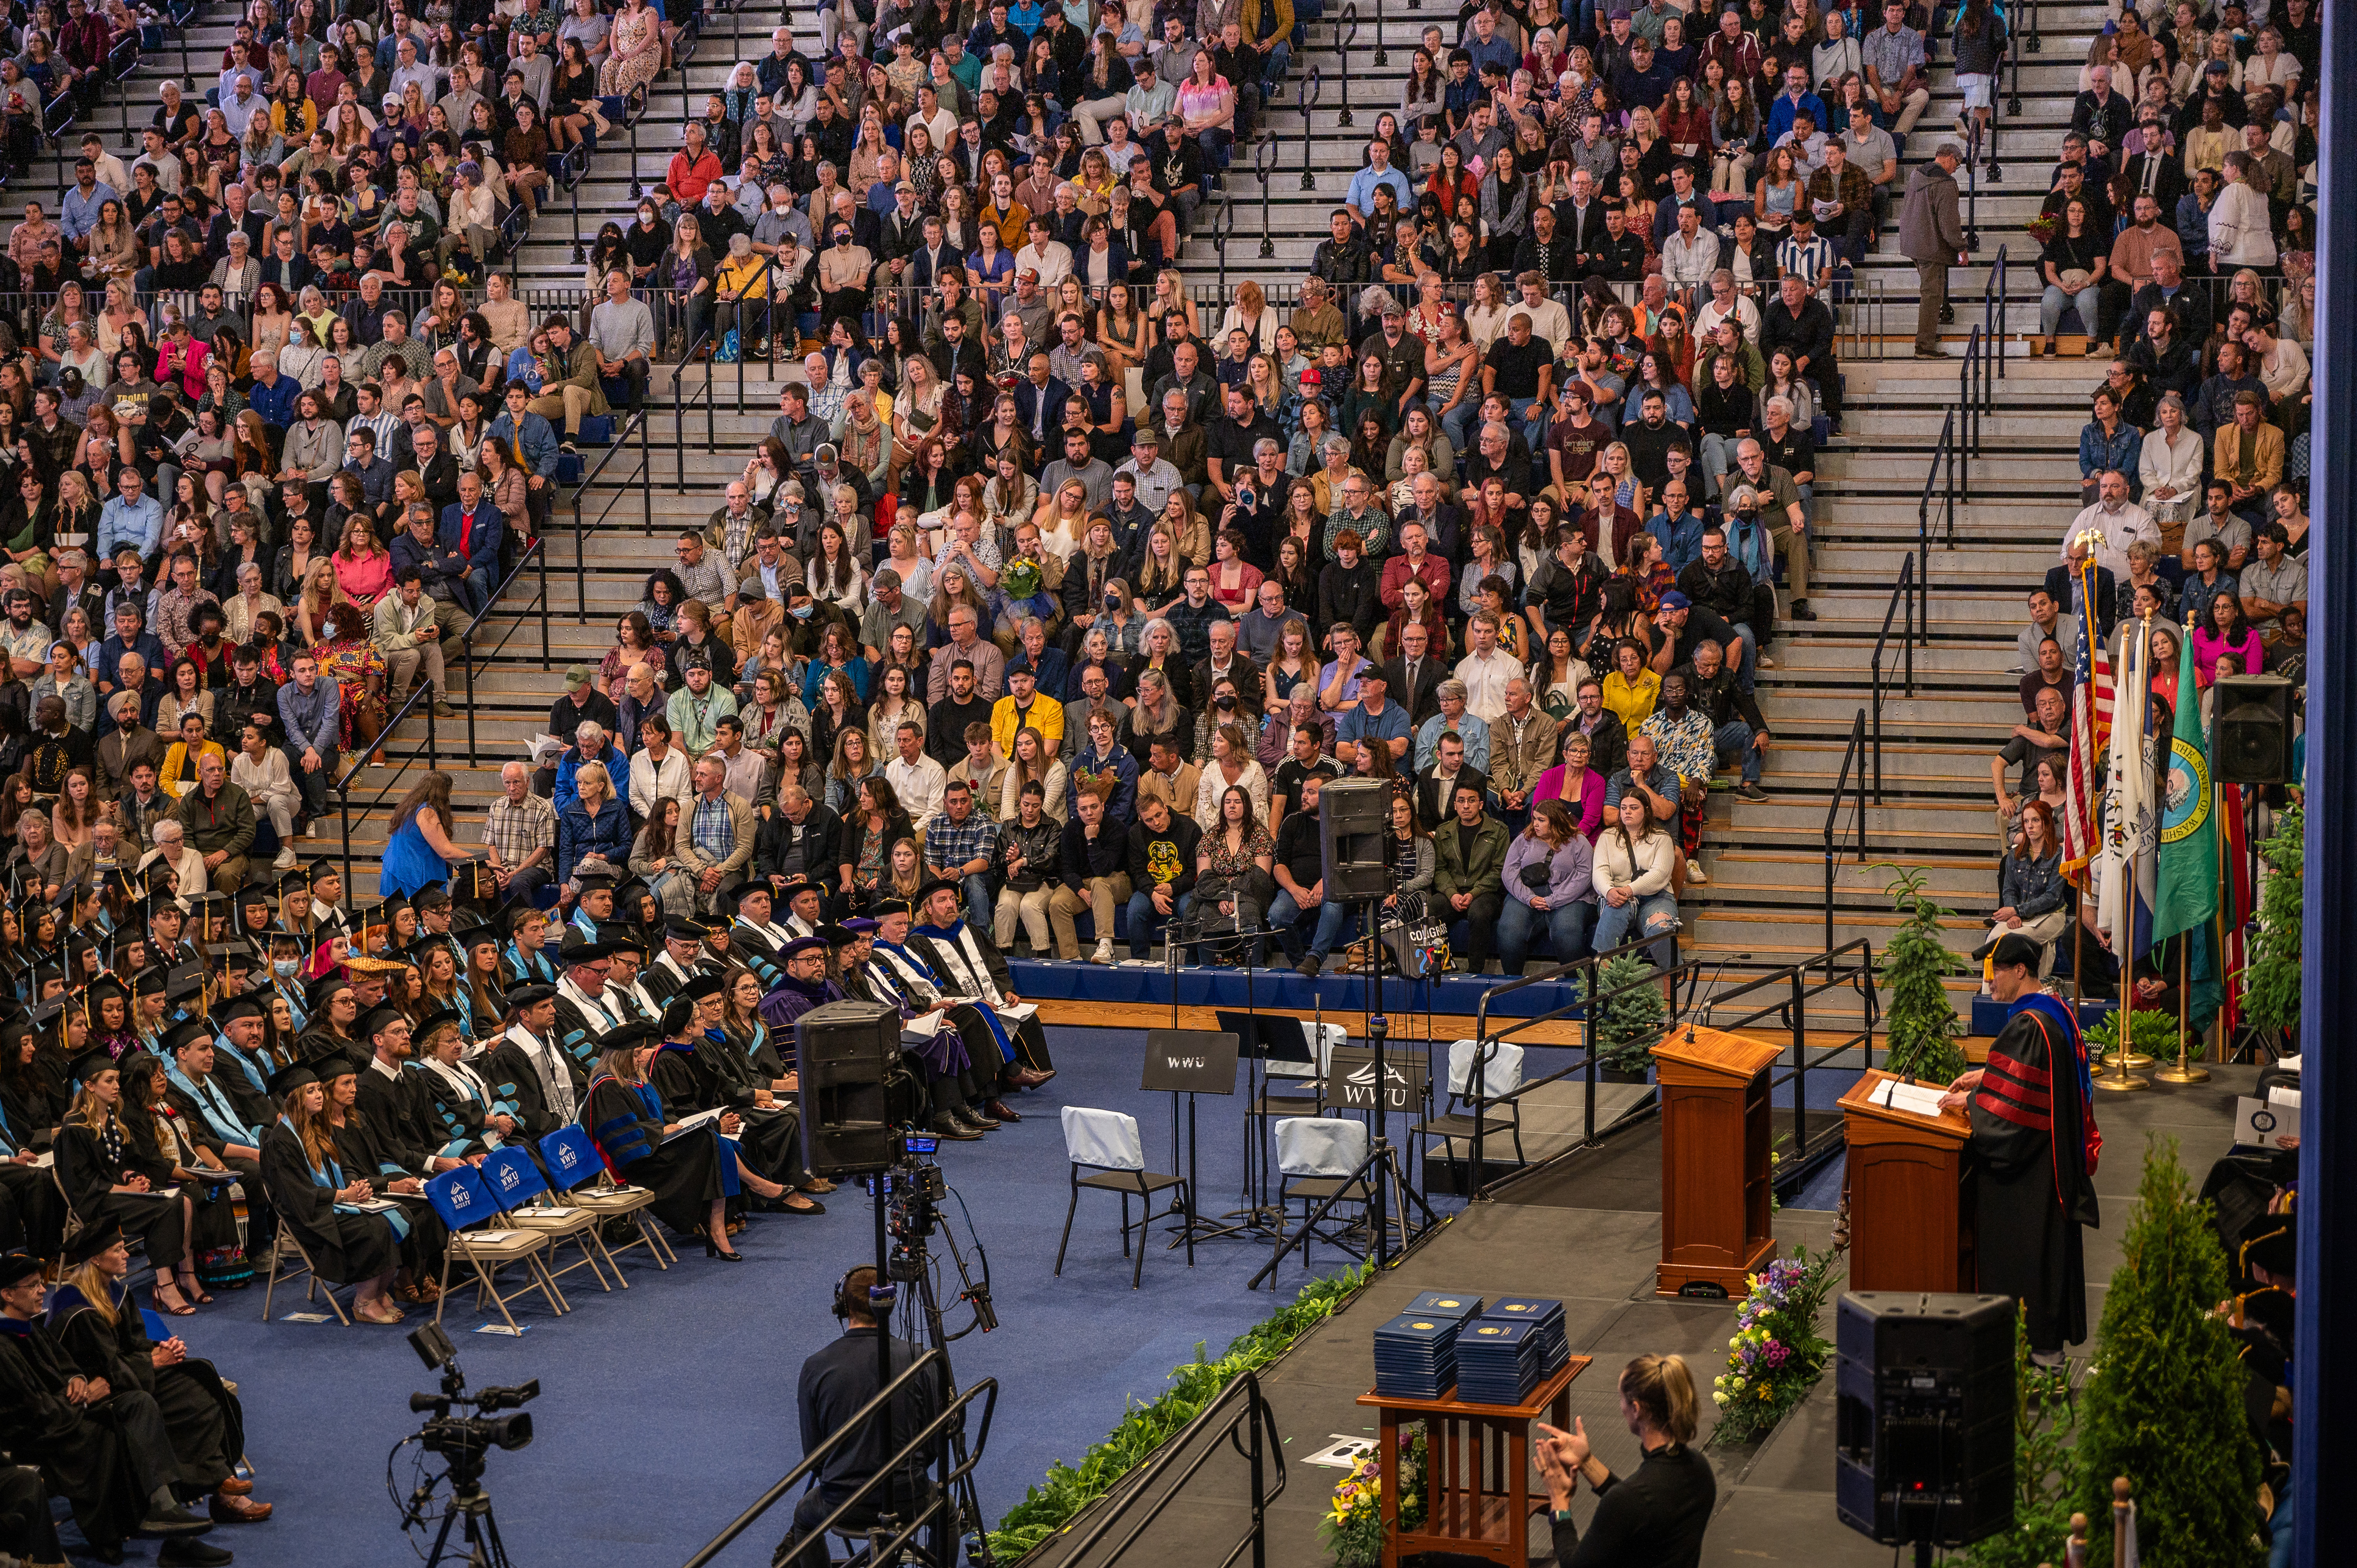 Crowd of students sitting on stairs waiting to receive their diplomas